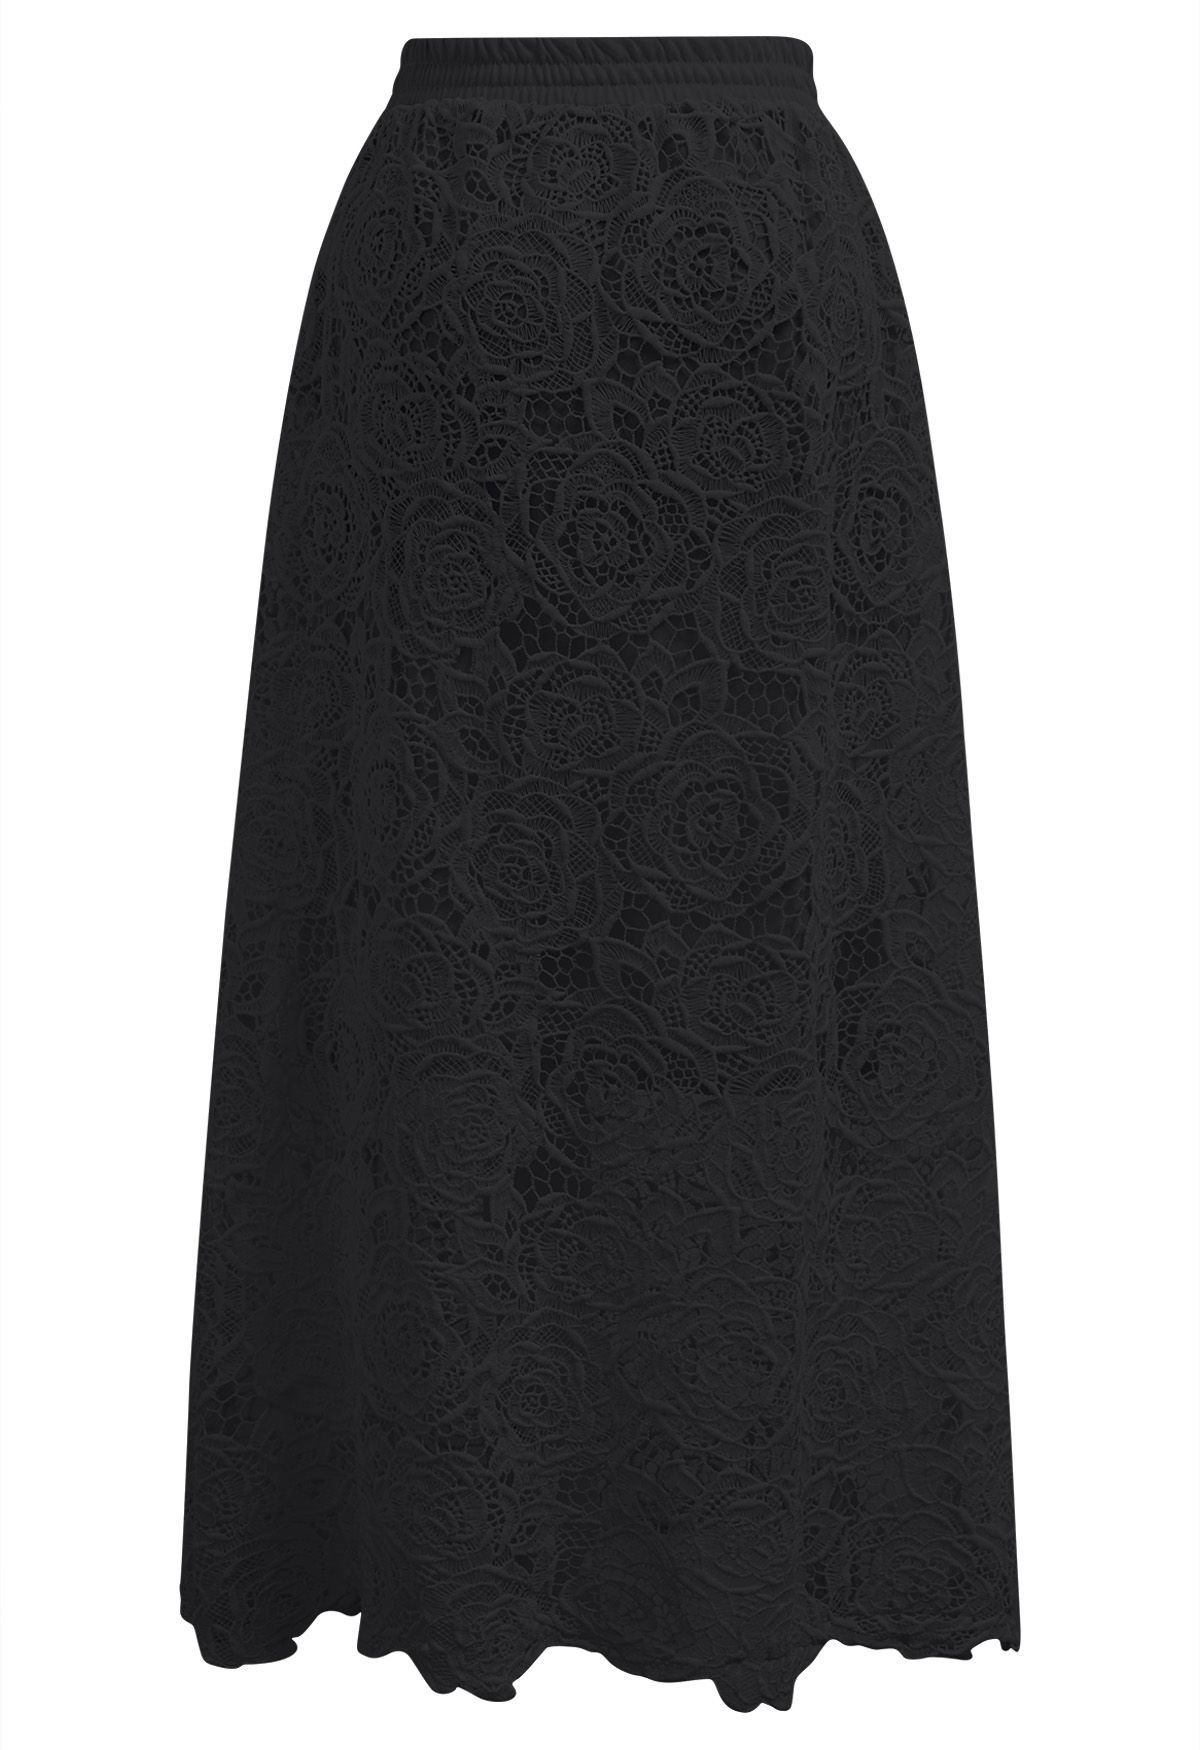 Exquisite Rose Cutwork Lace Maxi Skirt in Black